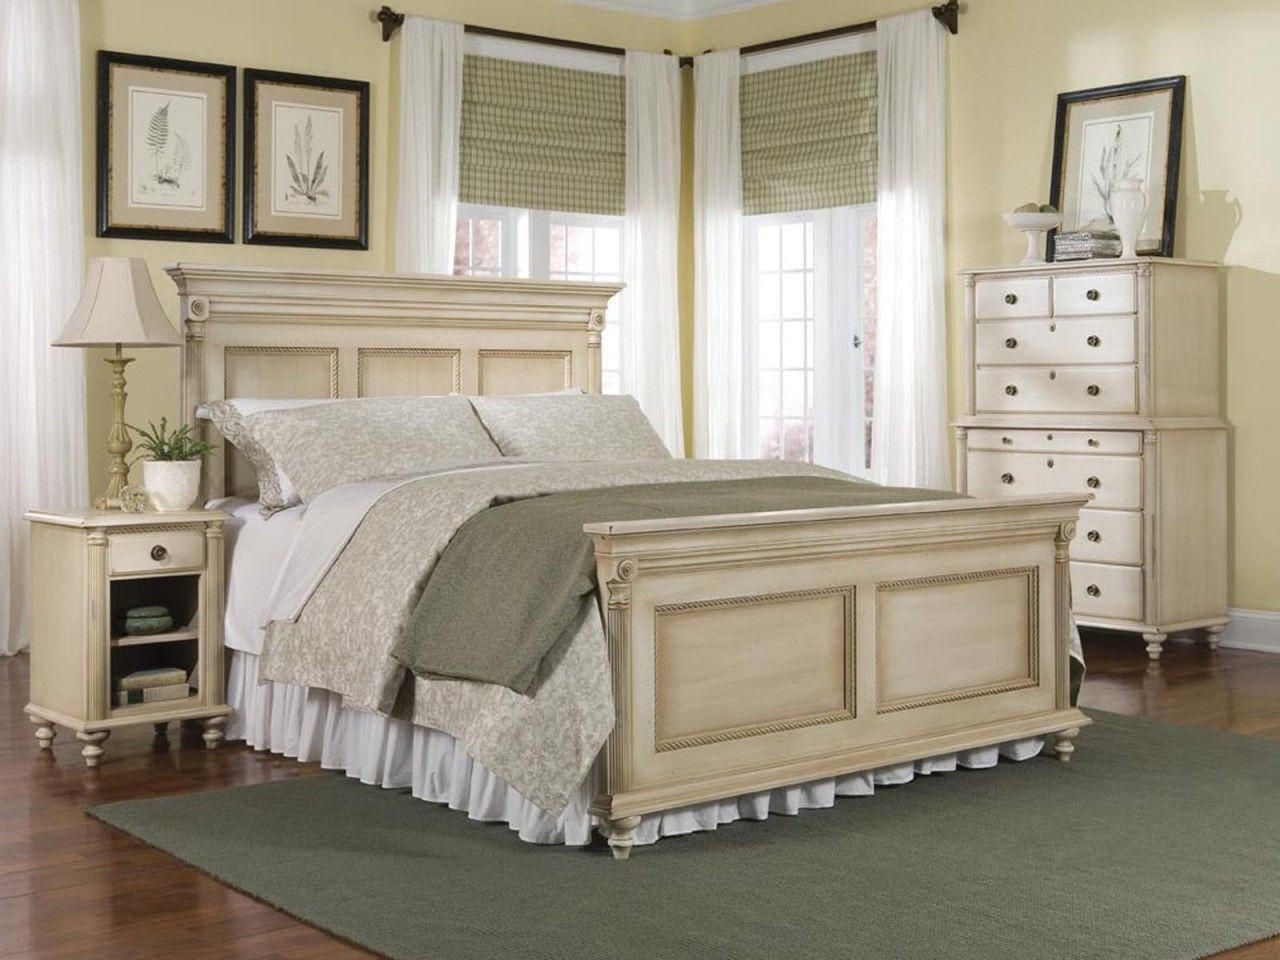 Cream Color Bedroom Set
 Pin on Future Homes